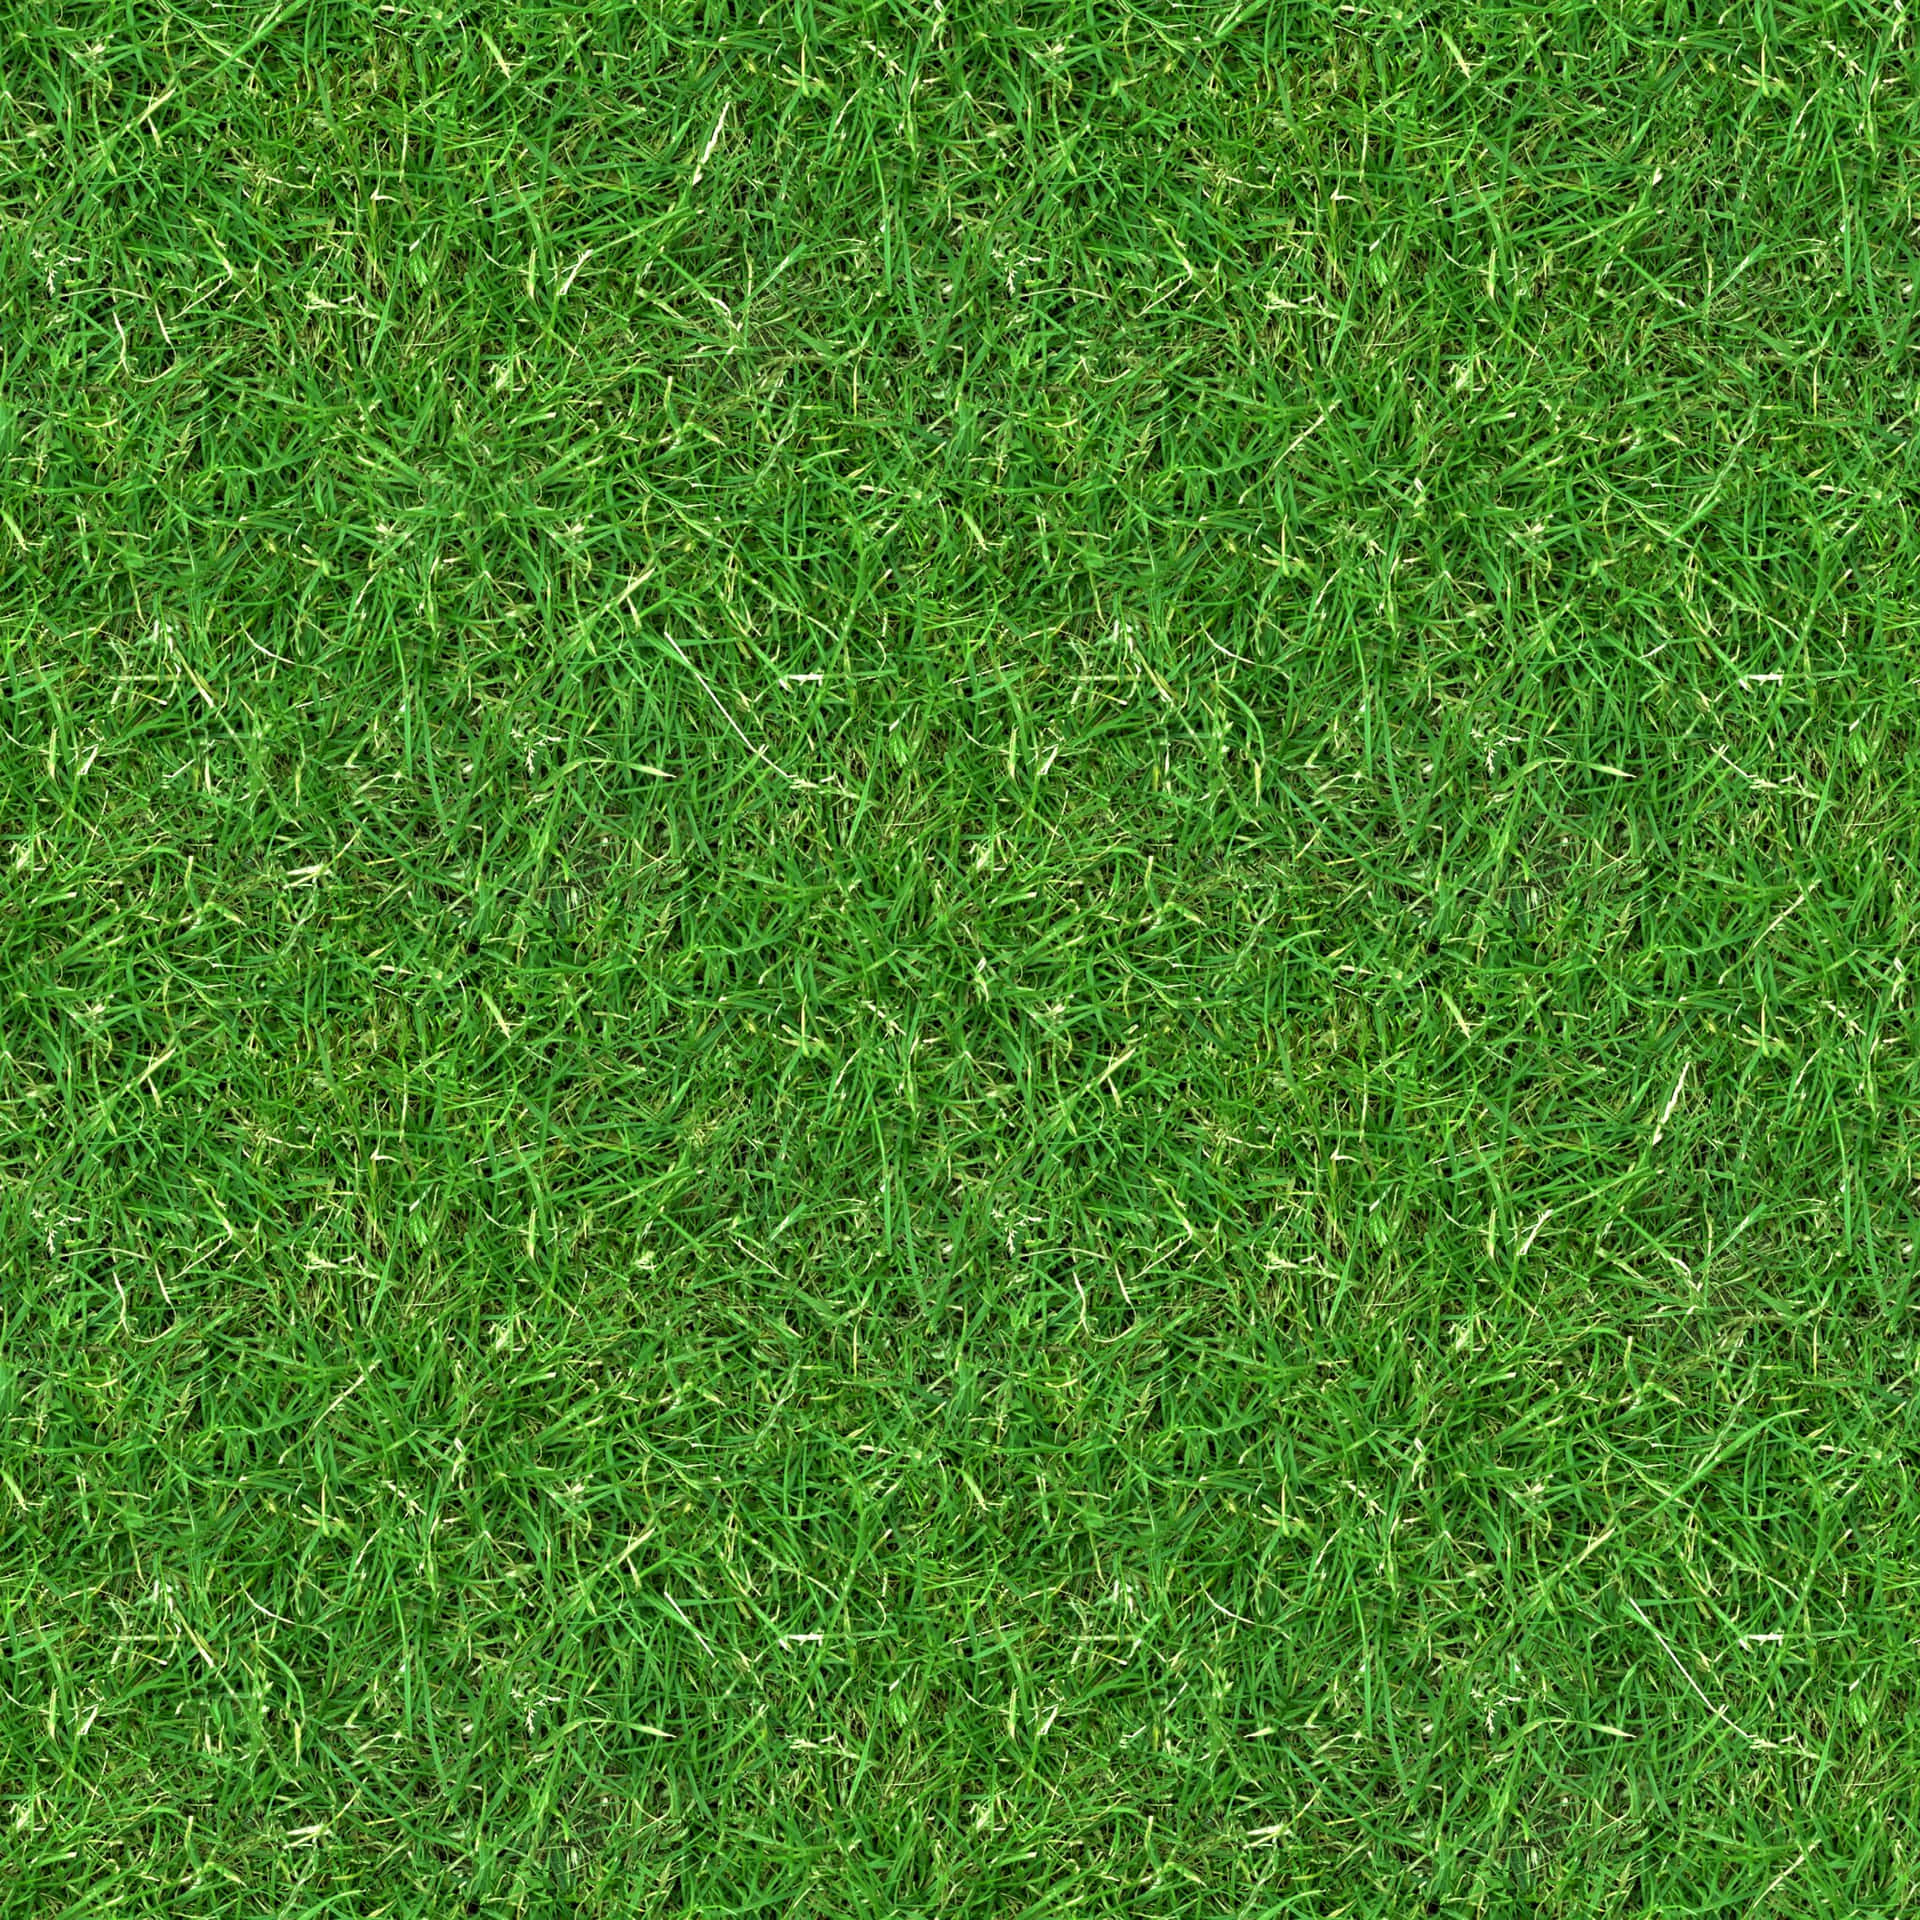 A Green Grass Background With A Lot Of Grass